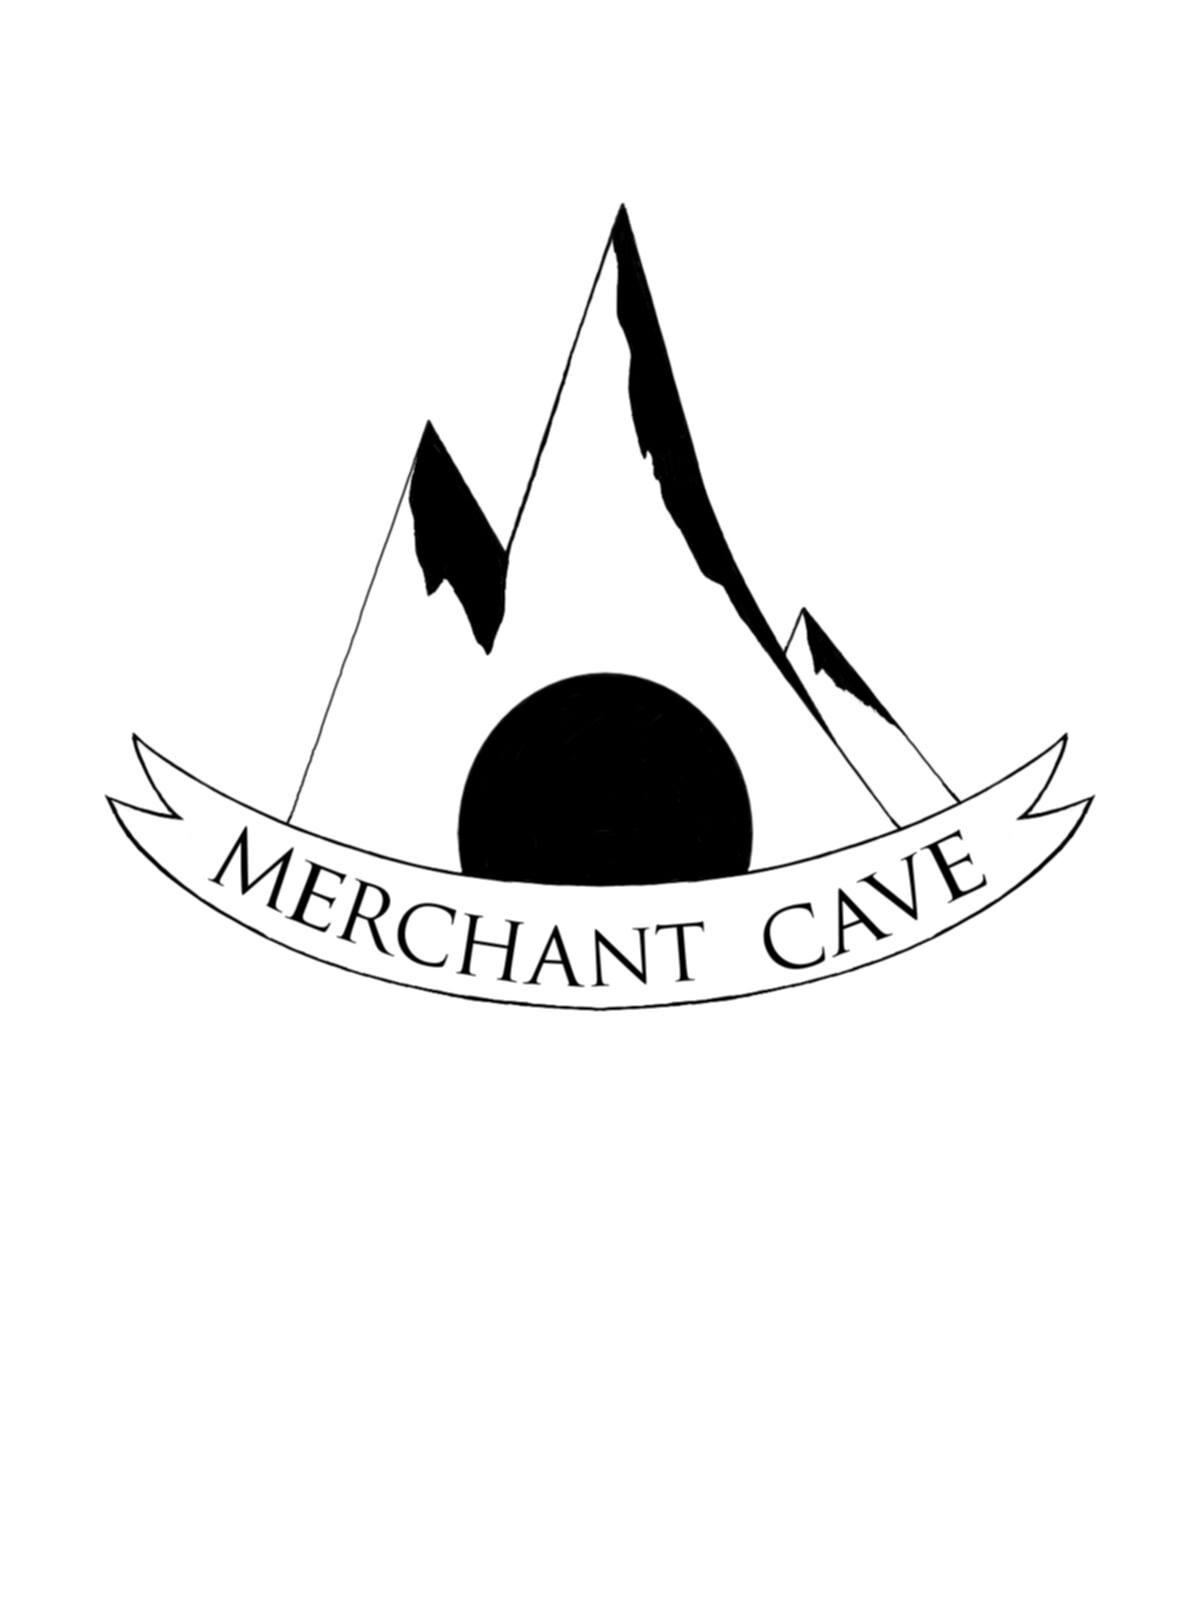 ArtStation - Merchant Cave - Logo and Packaging